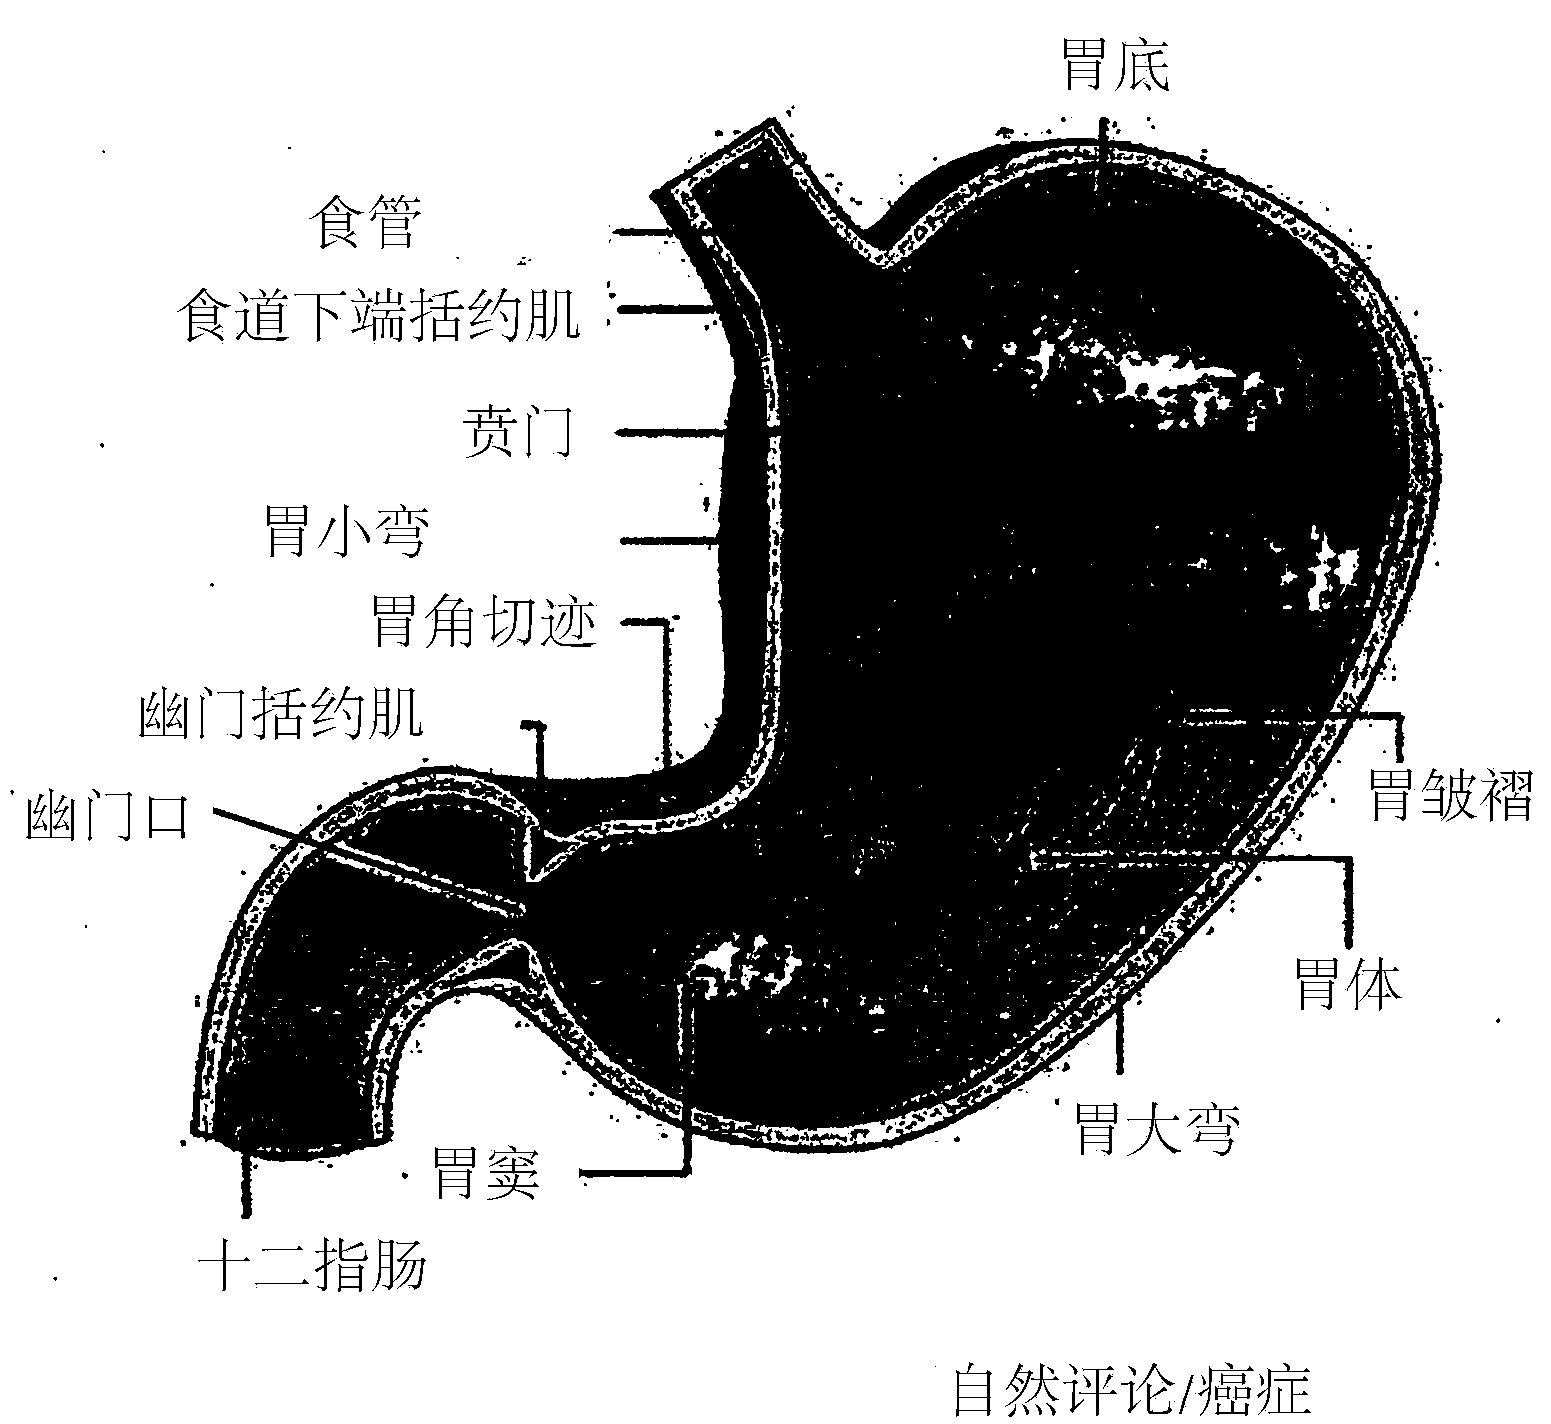 Anchoring and delivery system for a gastro-duodenal implant